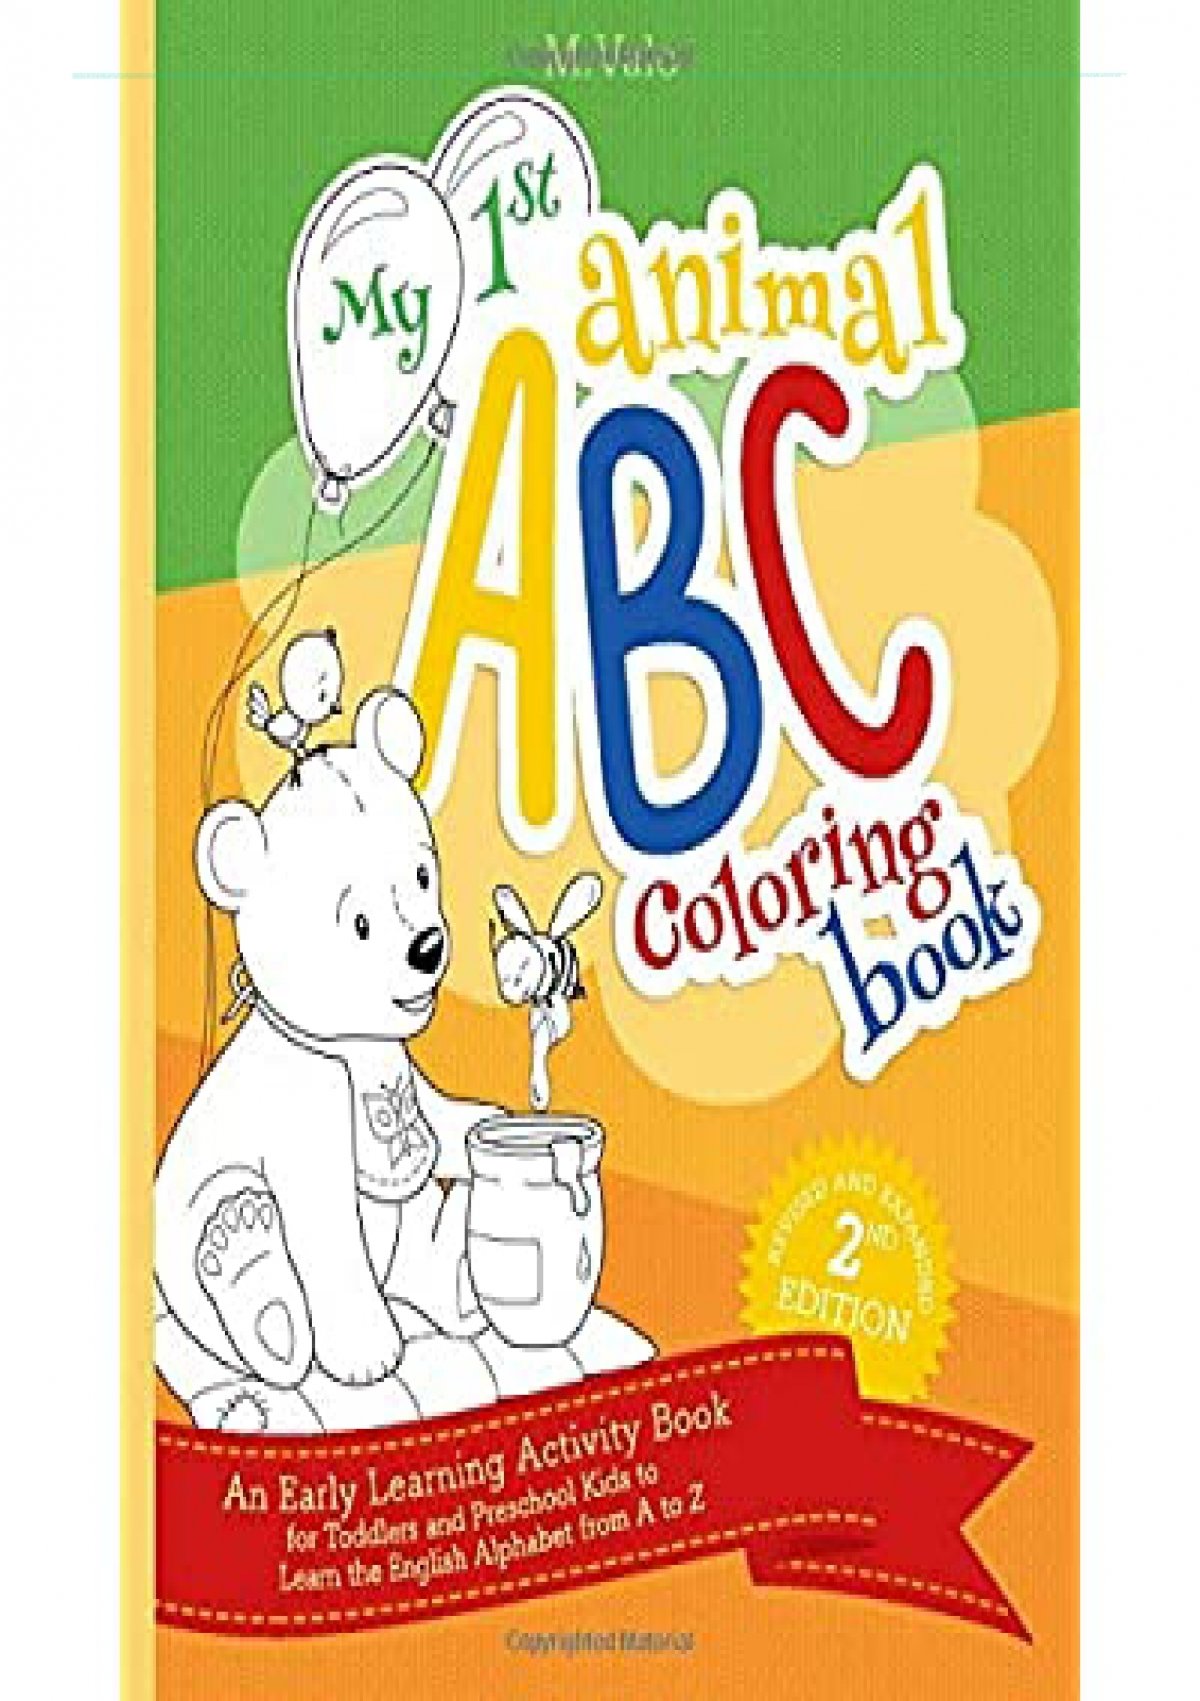 Download Download My First Animal Abc Coloring Book An Activity Book For Toddlers And Preschool Kids To Learn The English Alphabet Letters From A To Z Free